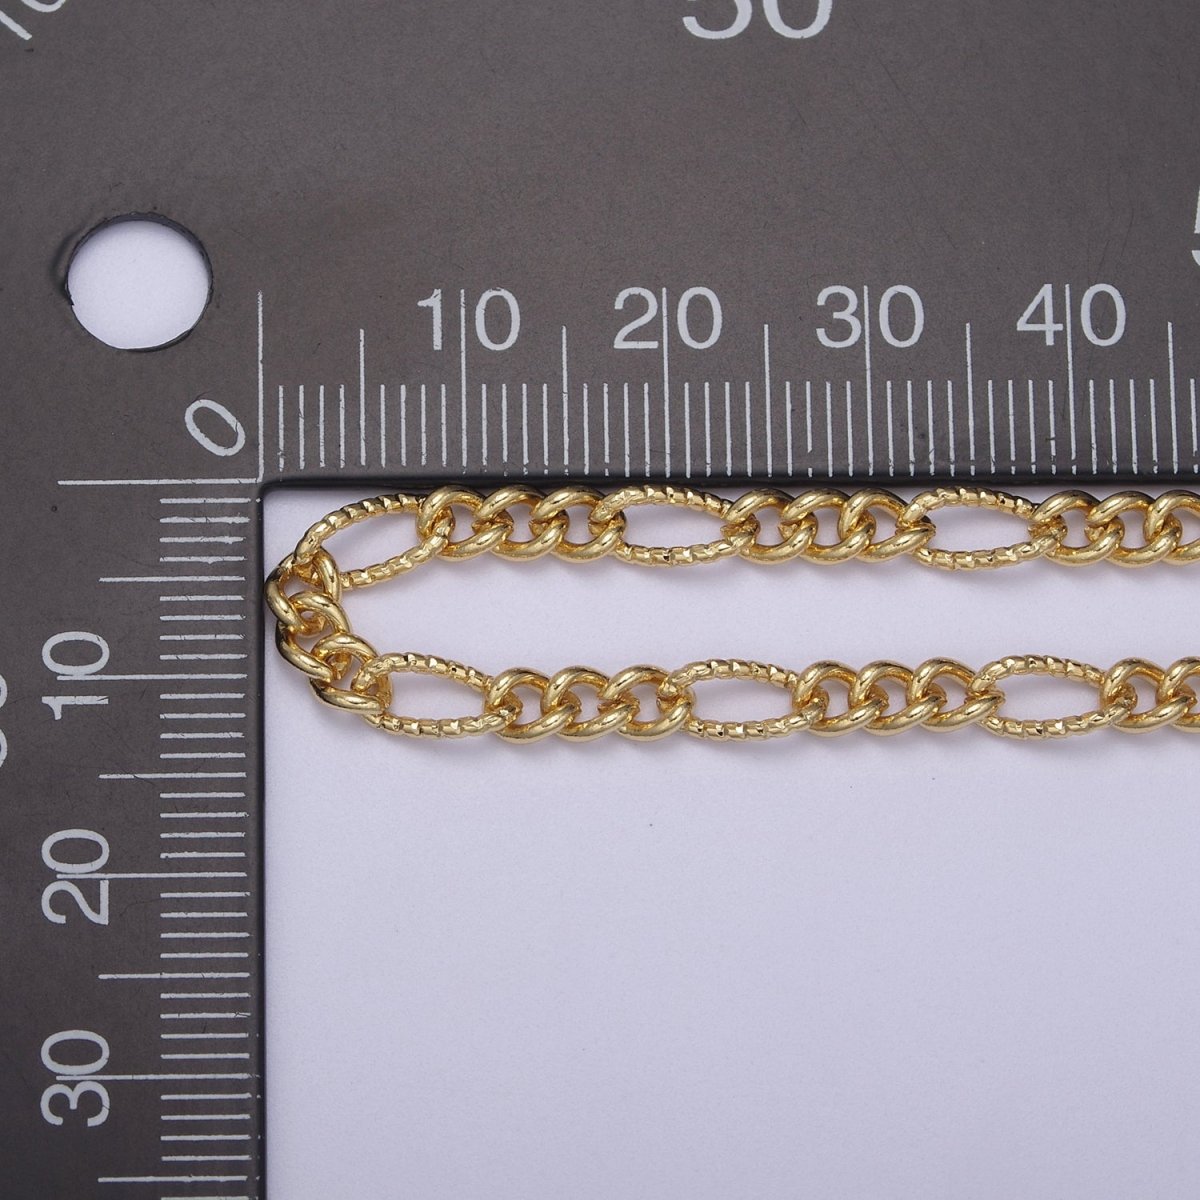 Dainty 4mm Unique Figaro Chain in Silver & Gold color, 24K Gold Filled Textured Figaro Chain Sold by Yard For Jewelry Making Supply Component | ROLL-629, ROLL-630 Clearance Pricing - DLUXCA